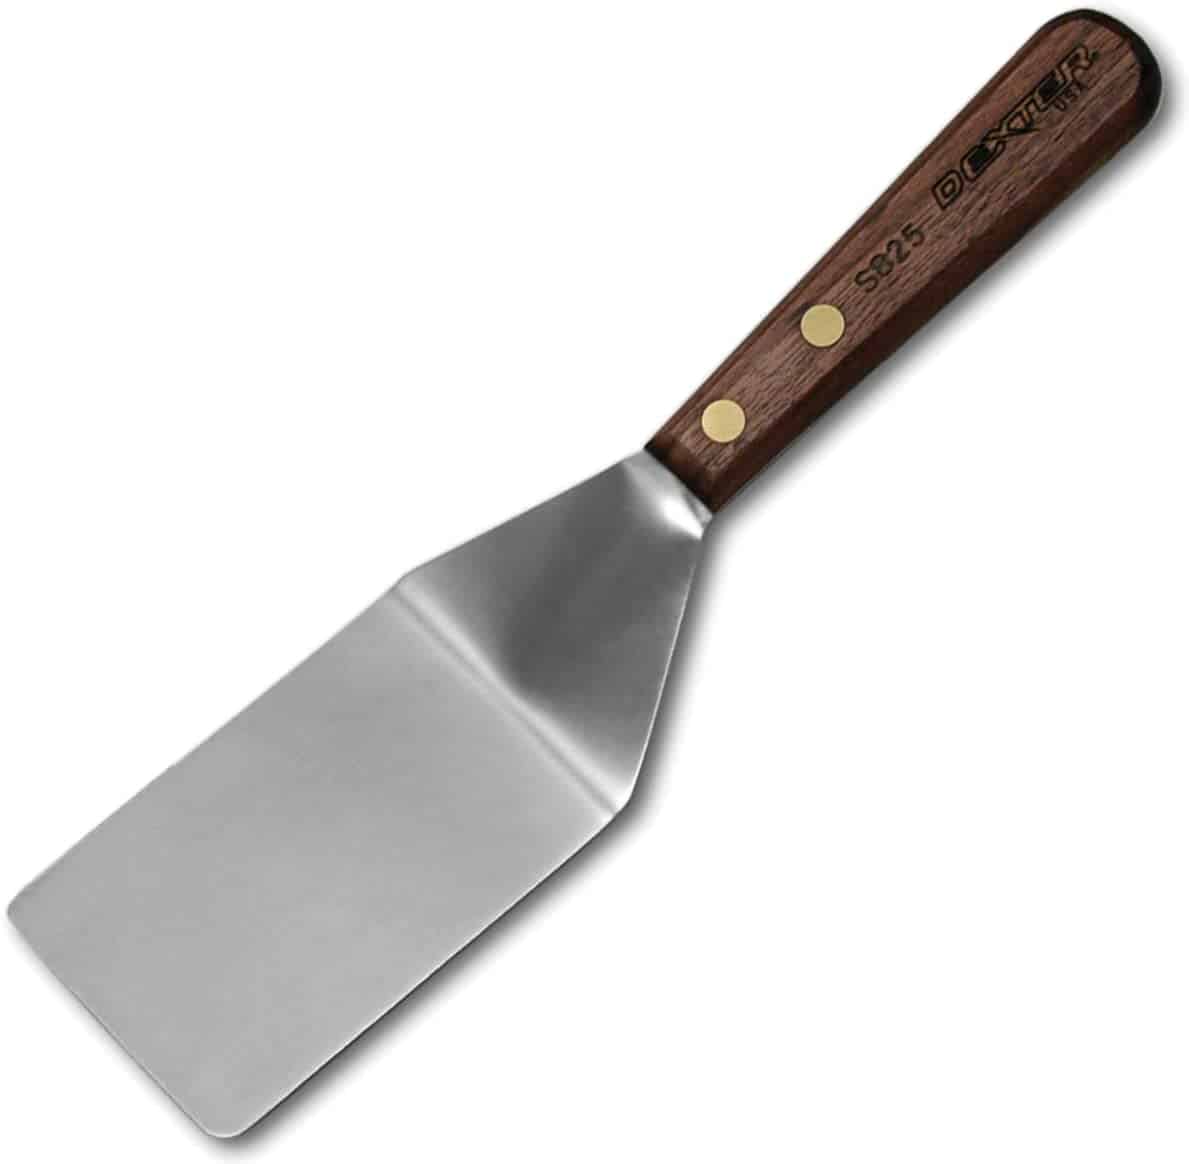 Best stainless steel spatula for pancakes- HIC Harold Import Co. Dexter-Russell